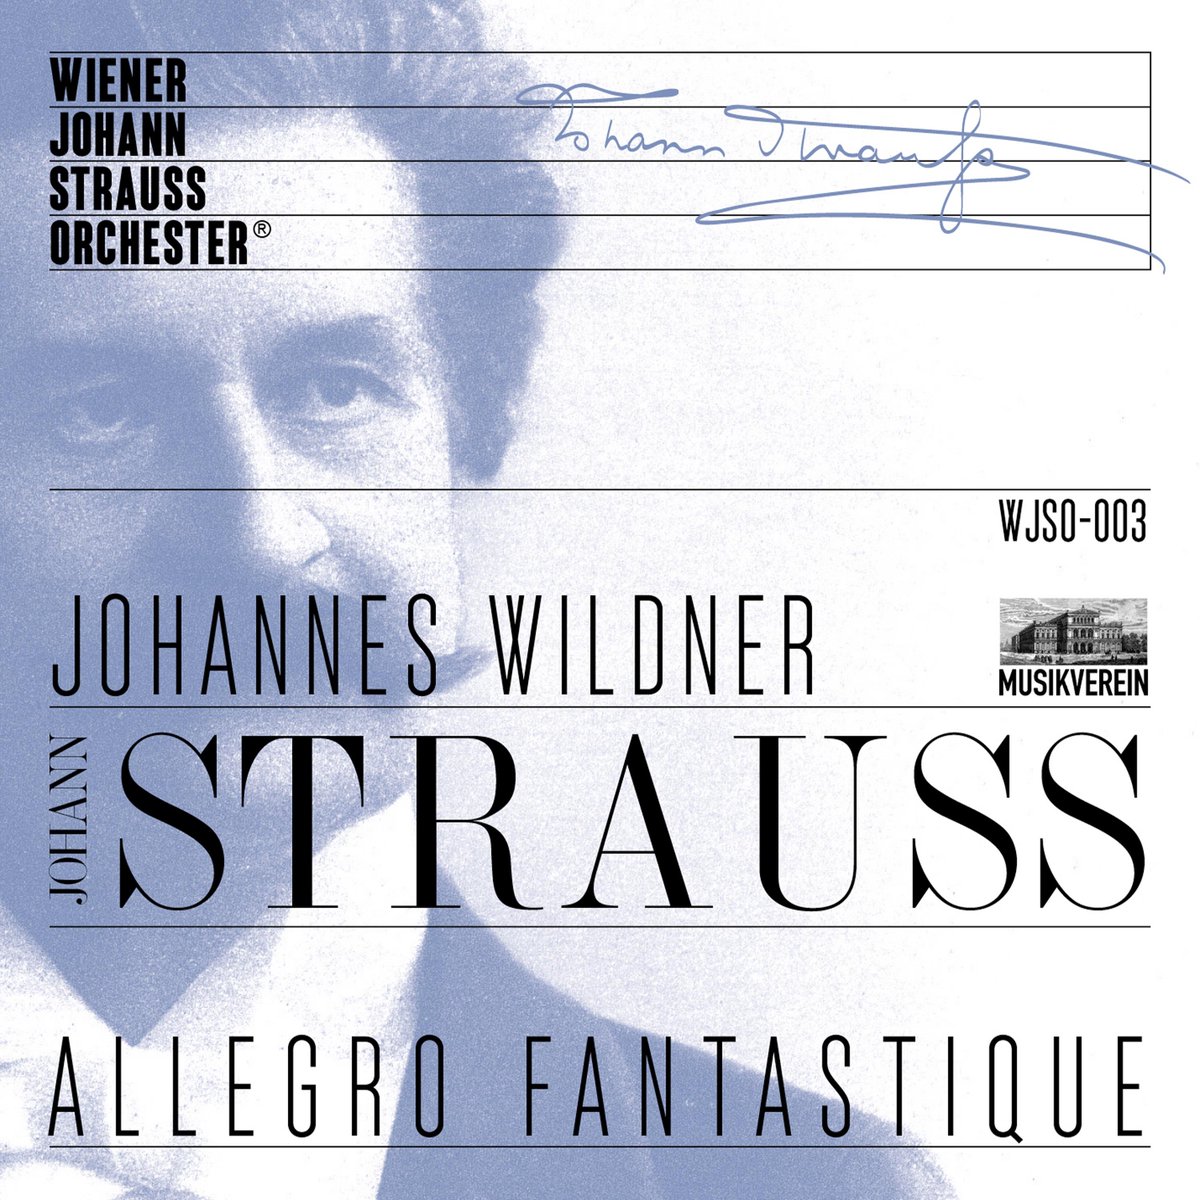 🎶 Strauss recording of the day 🎶
WJSO-003|09–J.Strauss: Allegro fantastique/Orchestral Fantasy
▶️ Spotify: ow.ly/3tT350yJ0DE
▶️ Apple Music: ow.ly/Xtq450yJ0Eq
▶️ Youtube: ow.ly/Tzaf50yJ0F8
📀 Info & Shop: ow.ly/81QX50yJ0CI